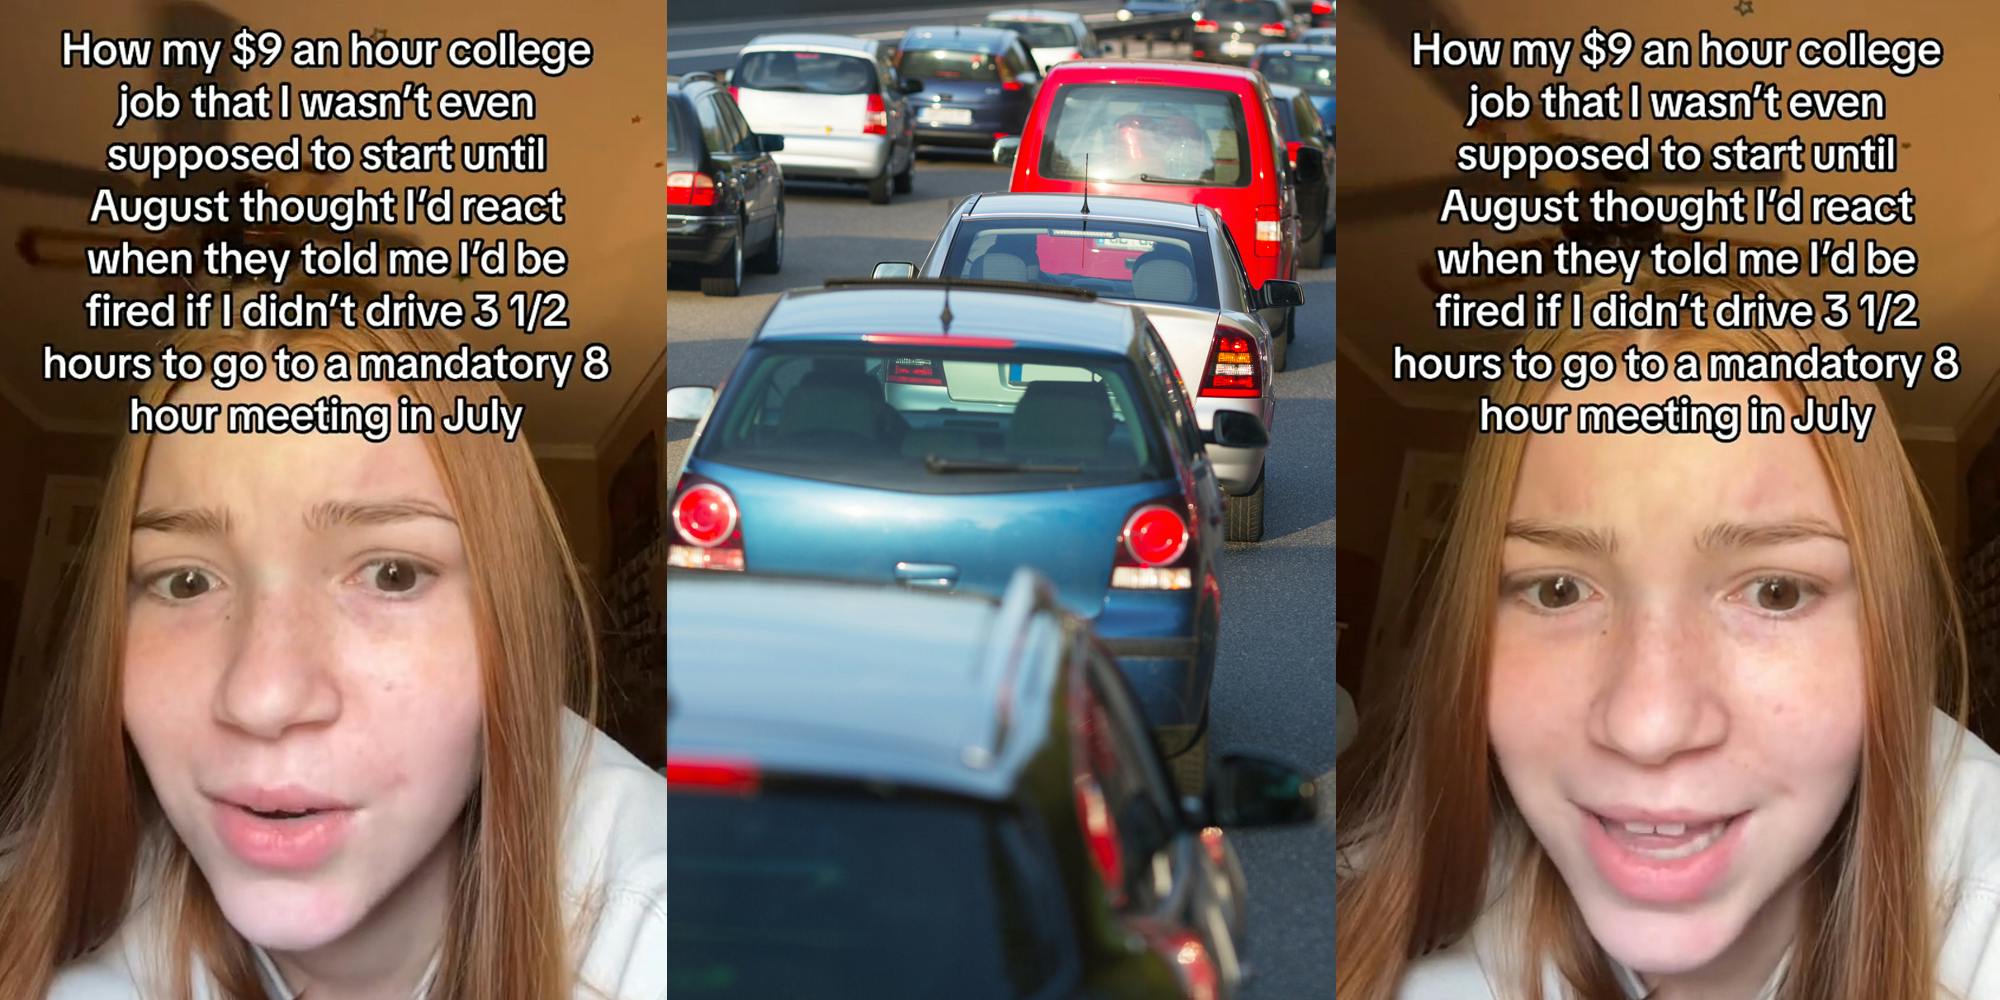 worker speaking with caption "How my $9 an hour college job that I wasn't even supposed to start until August thought I'd react when they told me I'd be fired if I didn't drive 3 1/2 hours to go to a mandatory 8 hour meeting in July" (l) cars in traffic on freeway (c) worker speaking with caption "How my $9 an hour college job that I wasn't even supposed to start until August thought I'd react when they told me I'd be fired if I didn't drive 3 1/2 hours to go to a mandatory 8 hour meeting in July" (r)